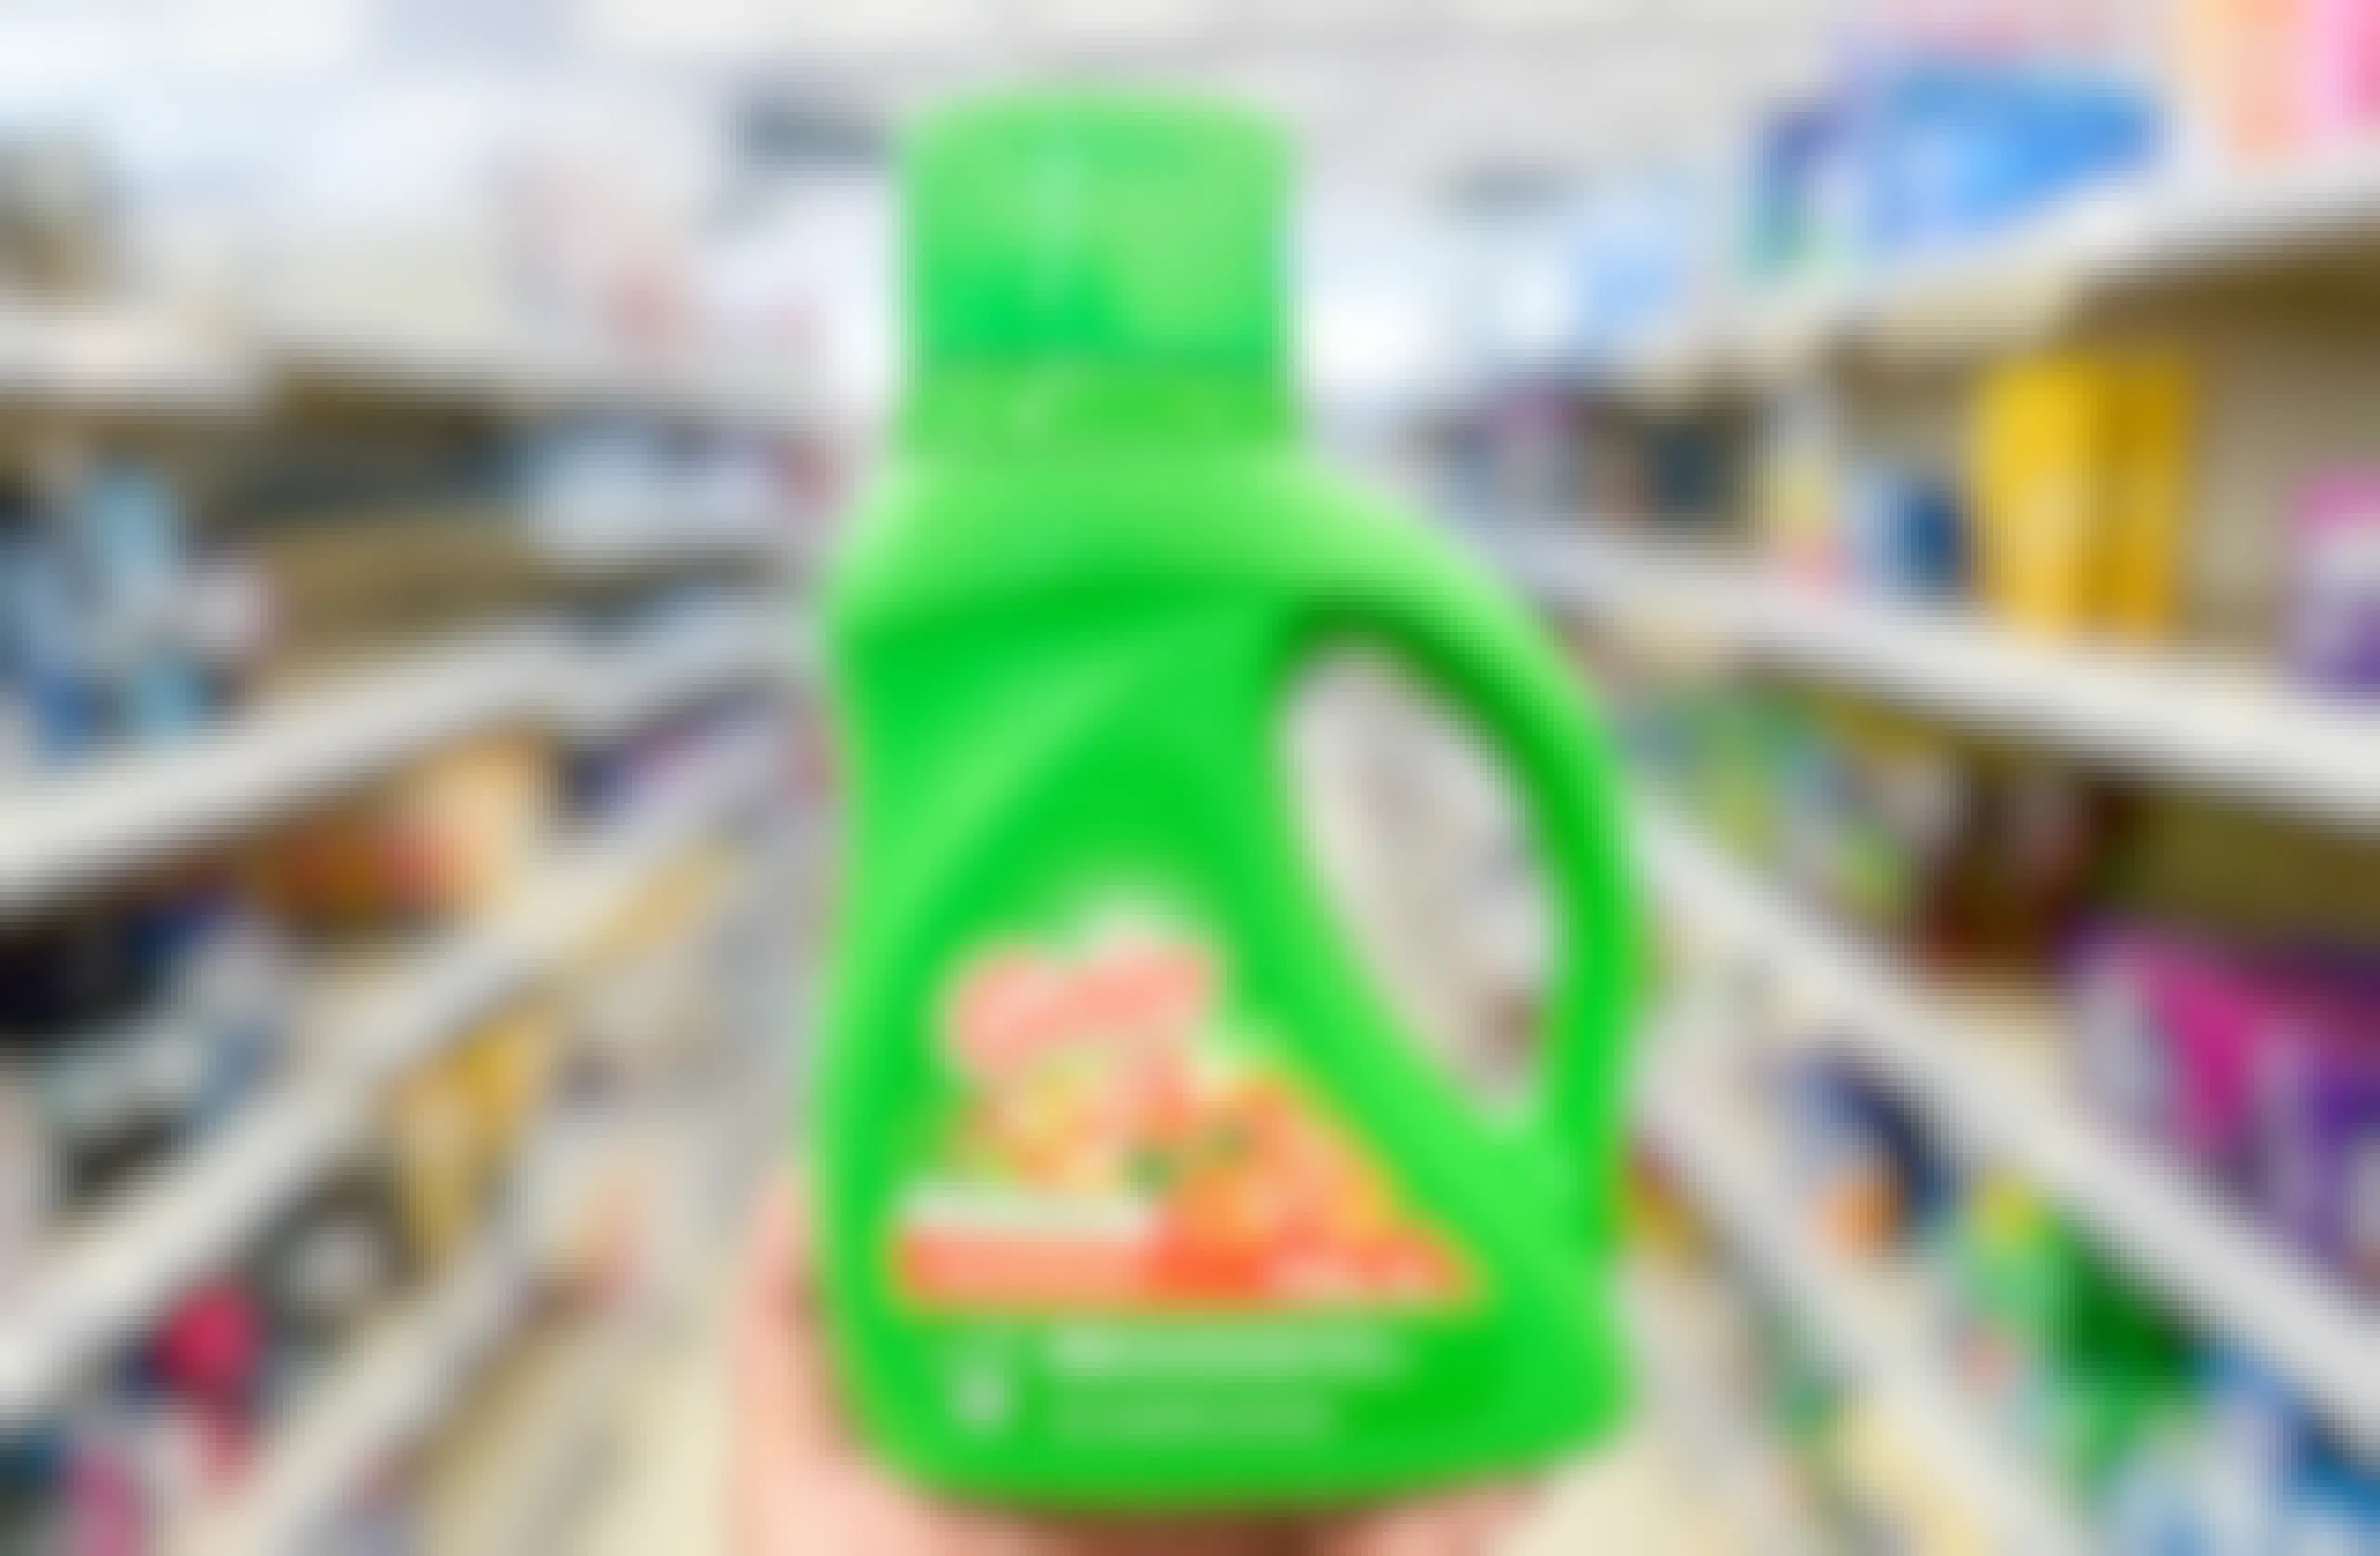 hand holding bottle of Gain in aisle